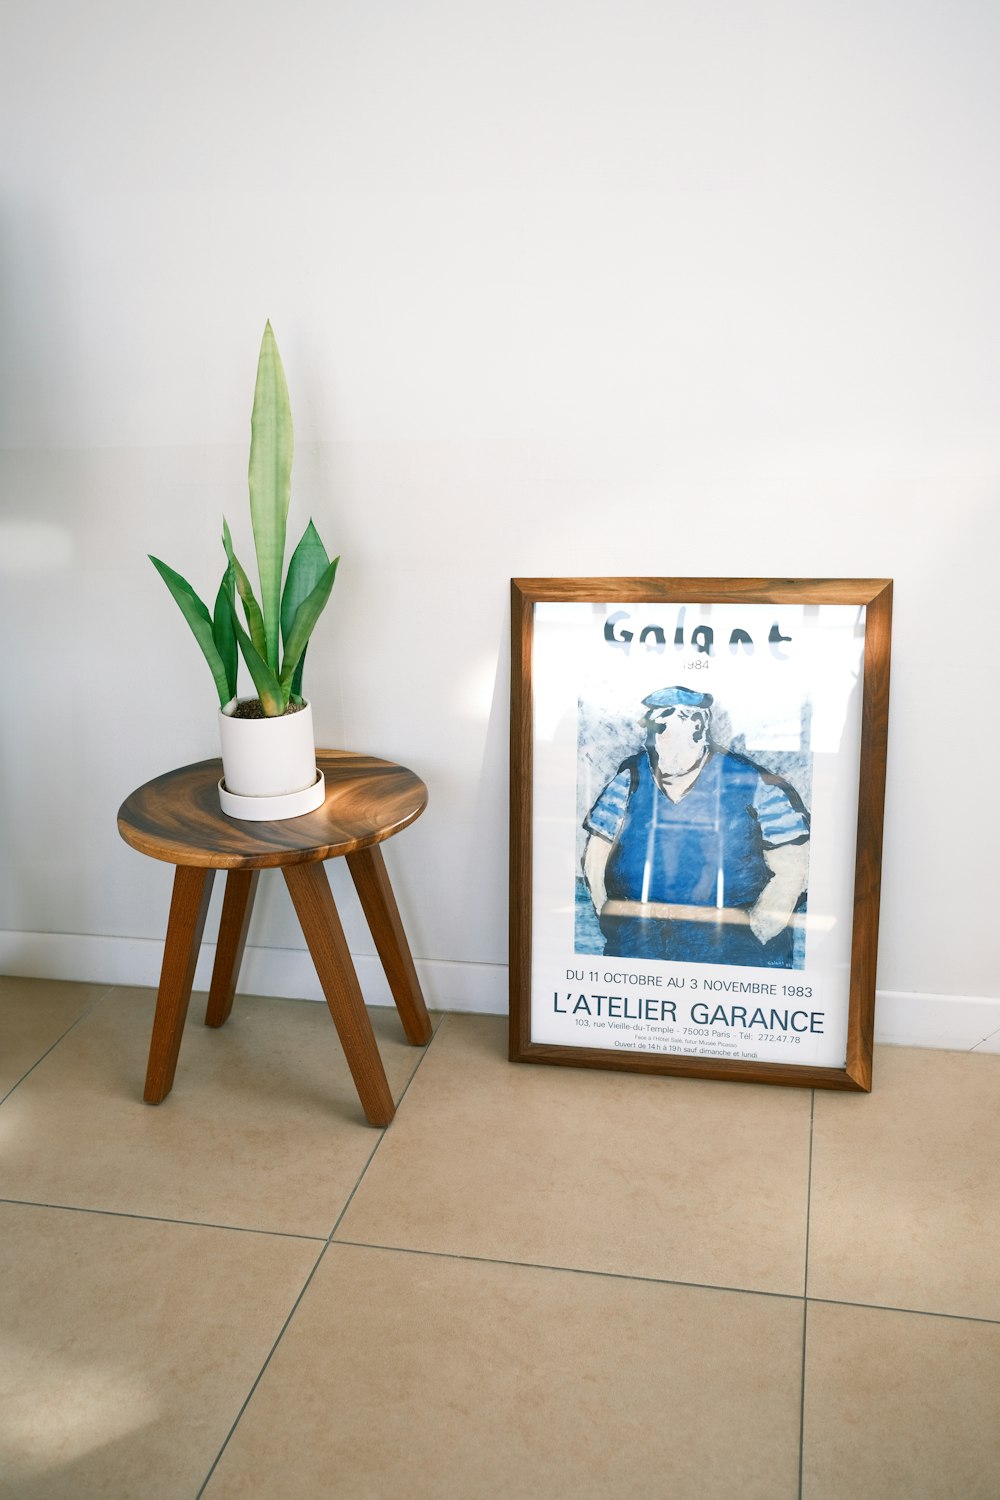 a small table with a potted plant next to a poster